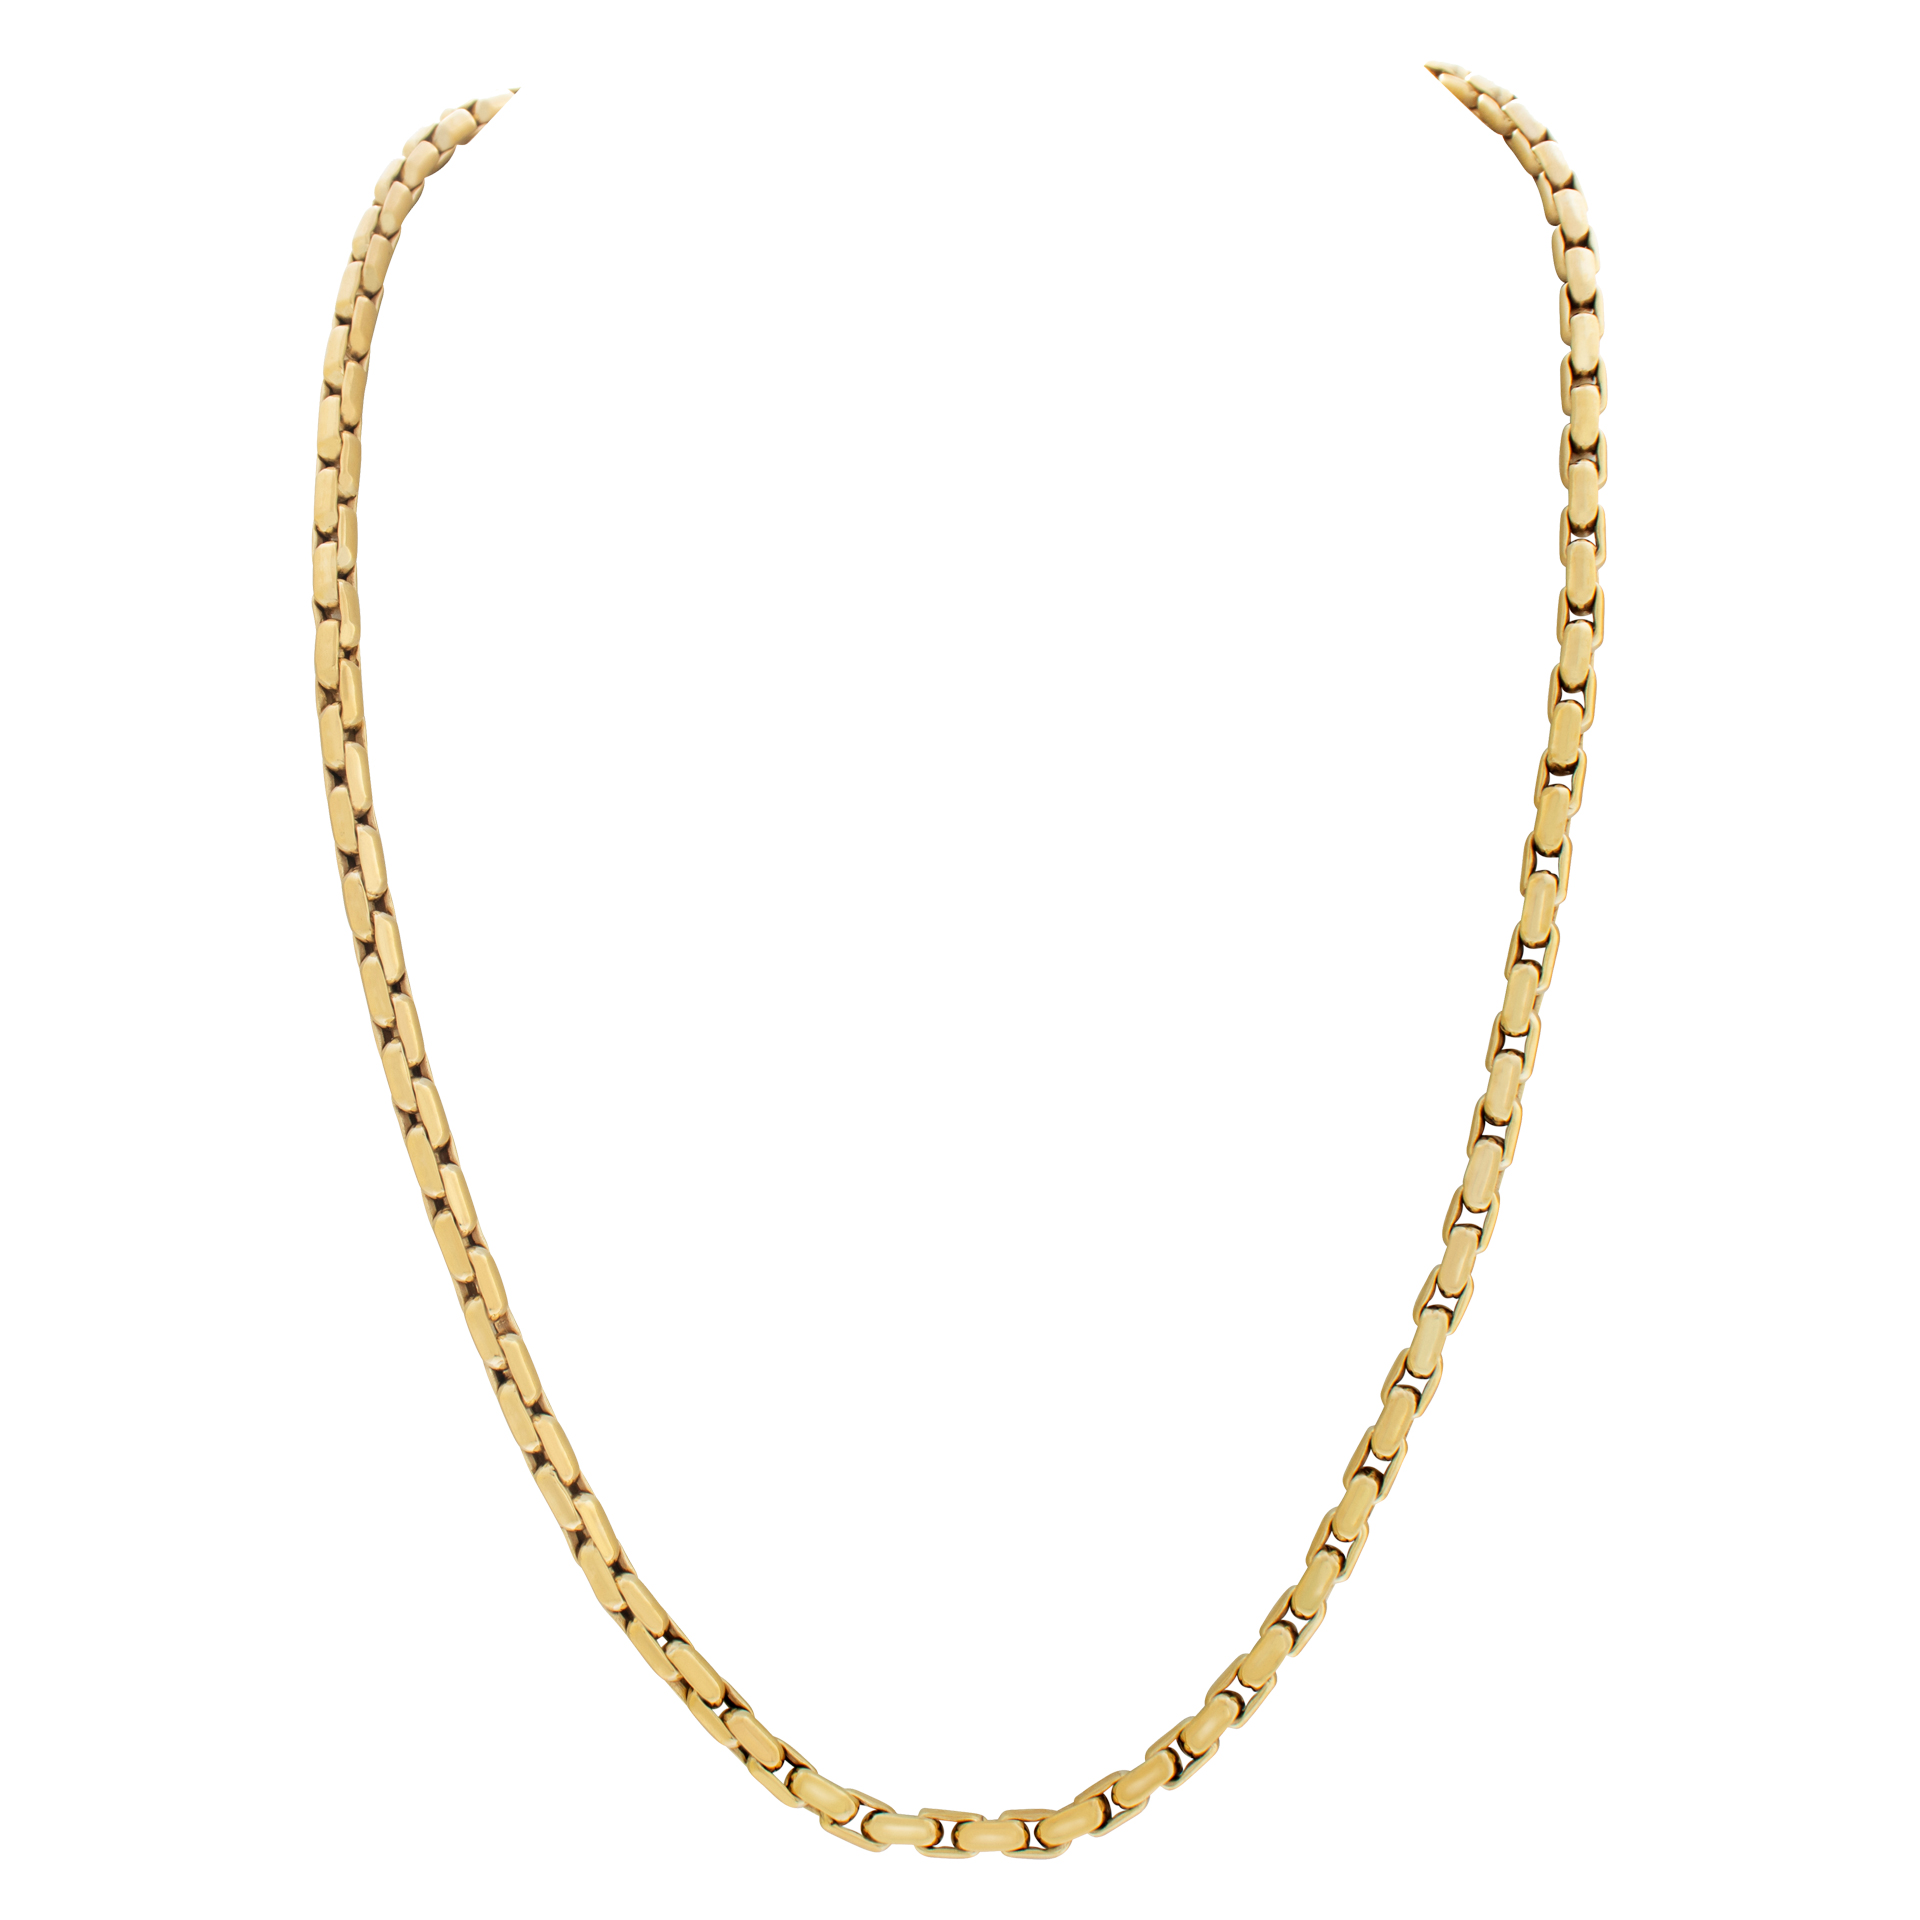 Flexible chainlink necklace in 14k yellow gold image 1